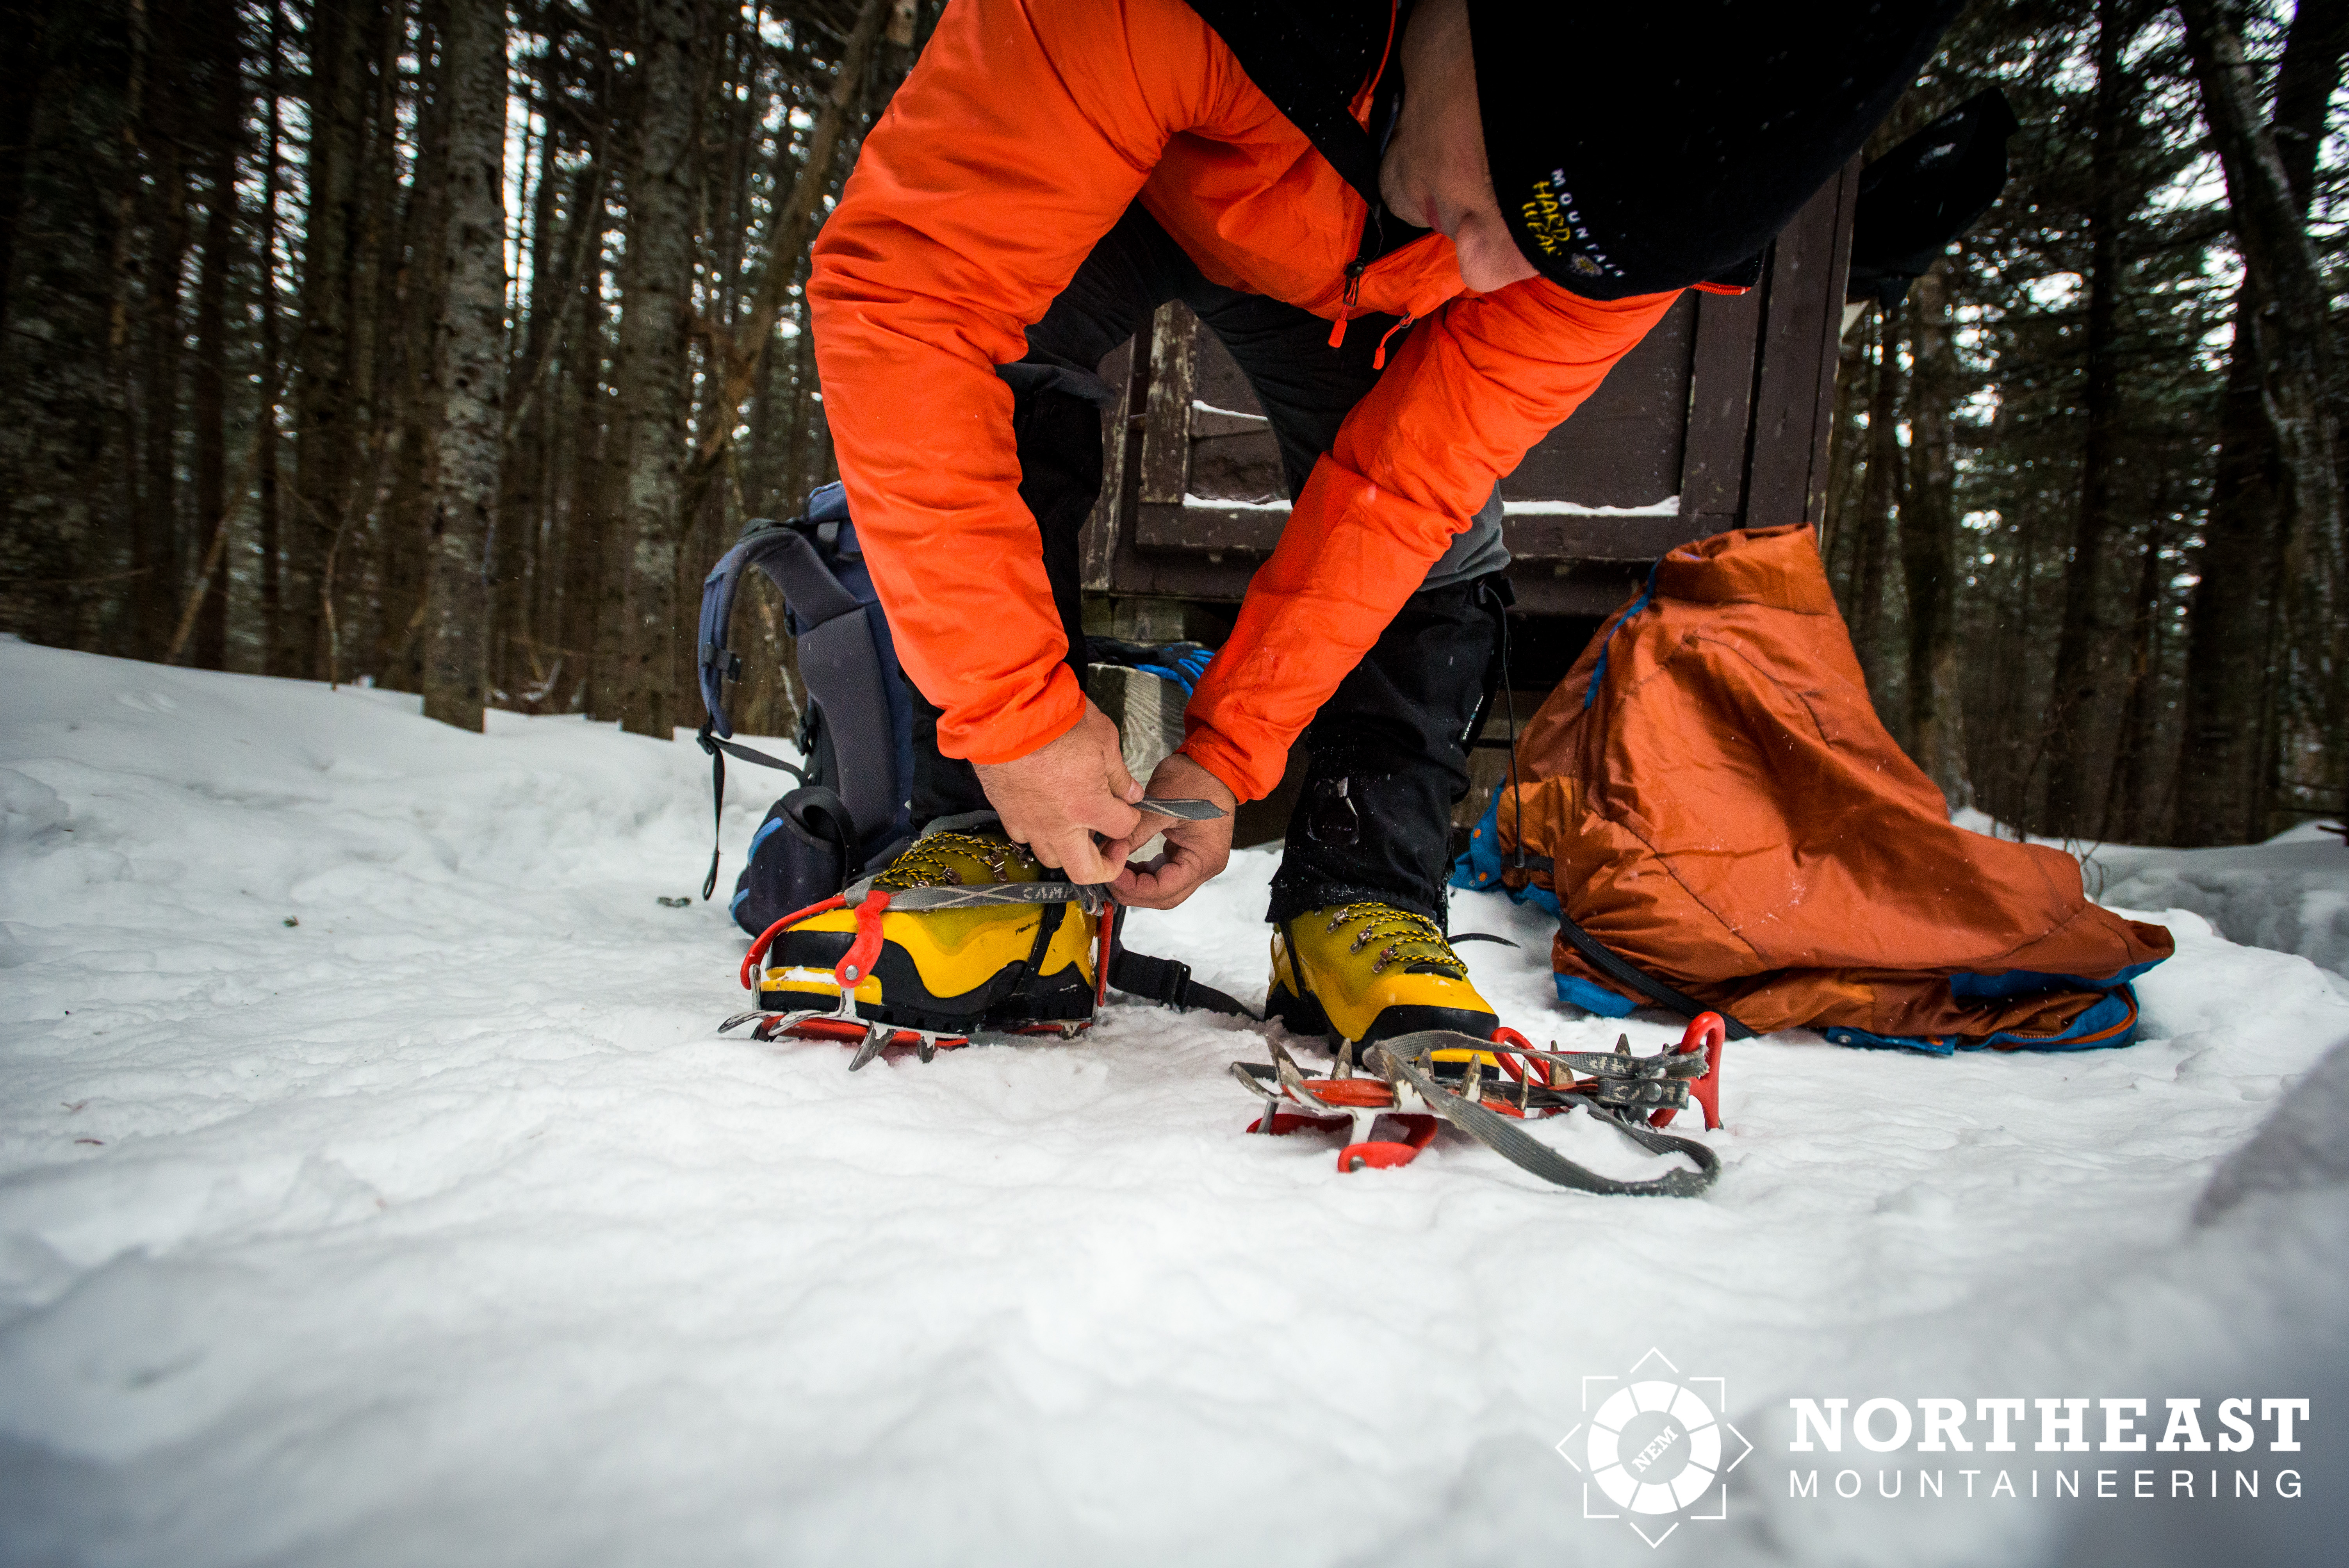 How To Select traction for your hike. Microspikes, Crampons or Snowshoes?